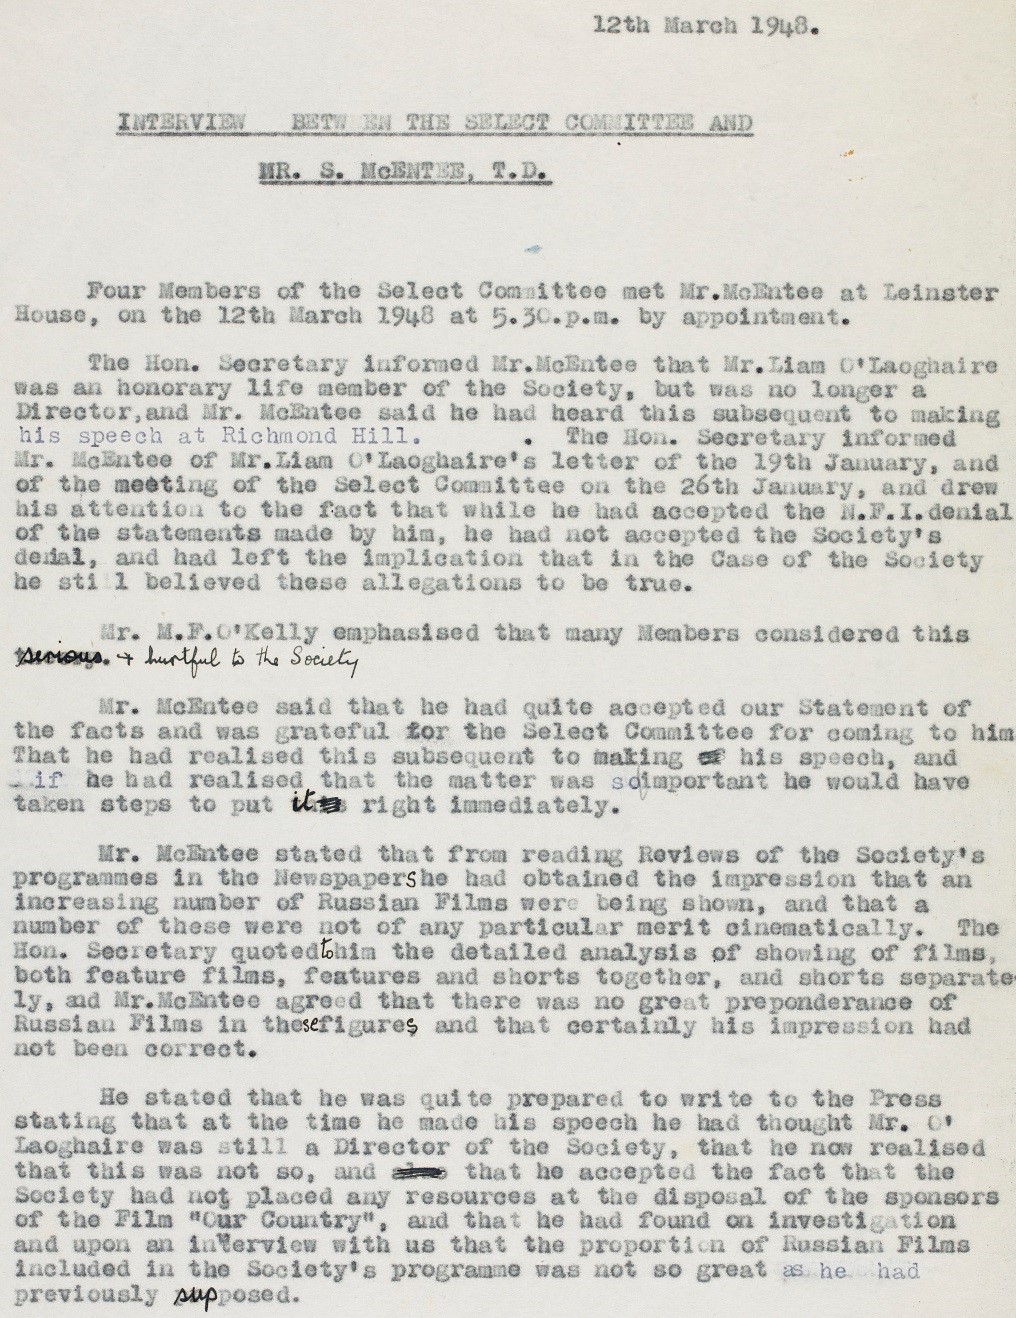 MS 50,000/76/6: Interview notes between the Irish Film Society select committee and Seán McEntee T.D.